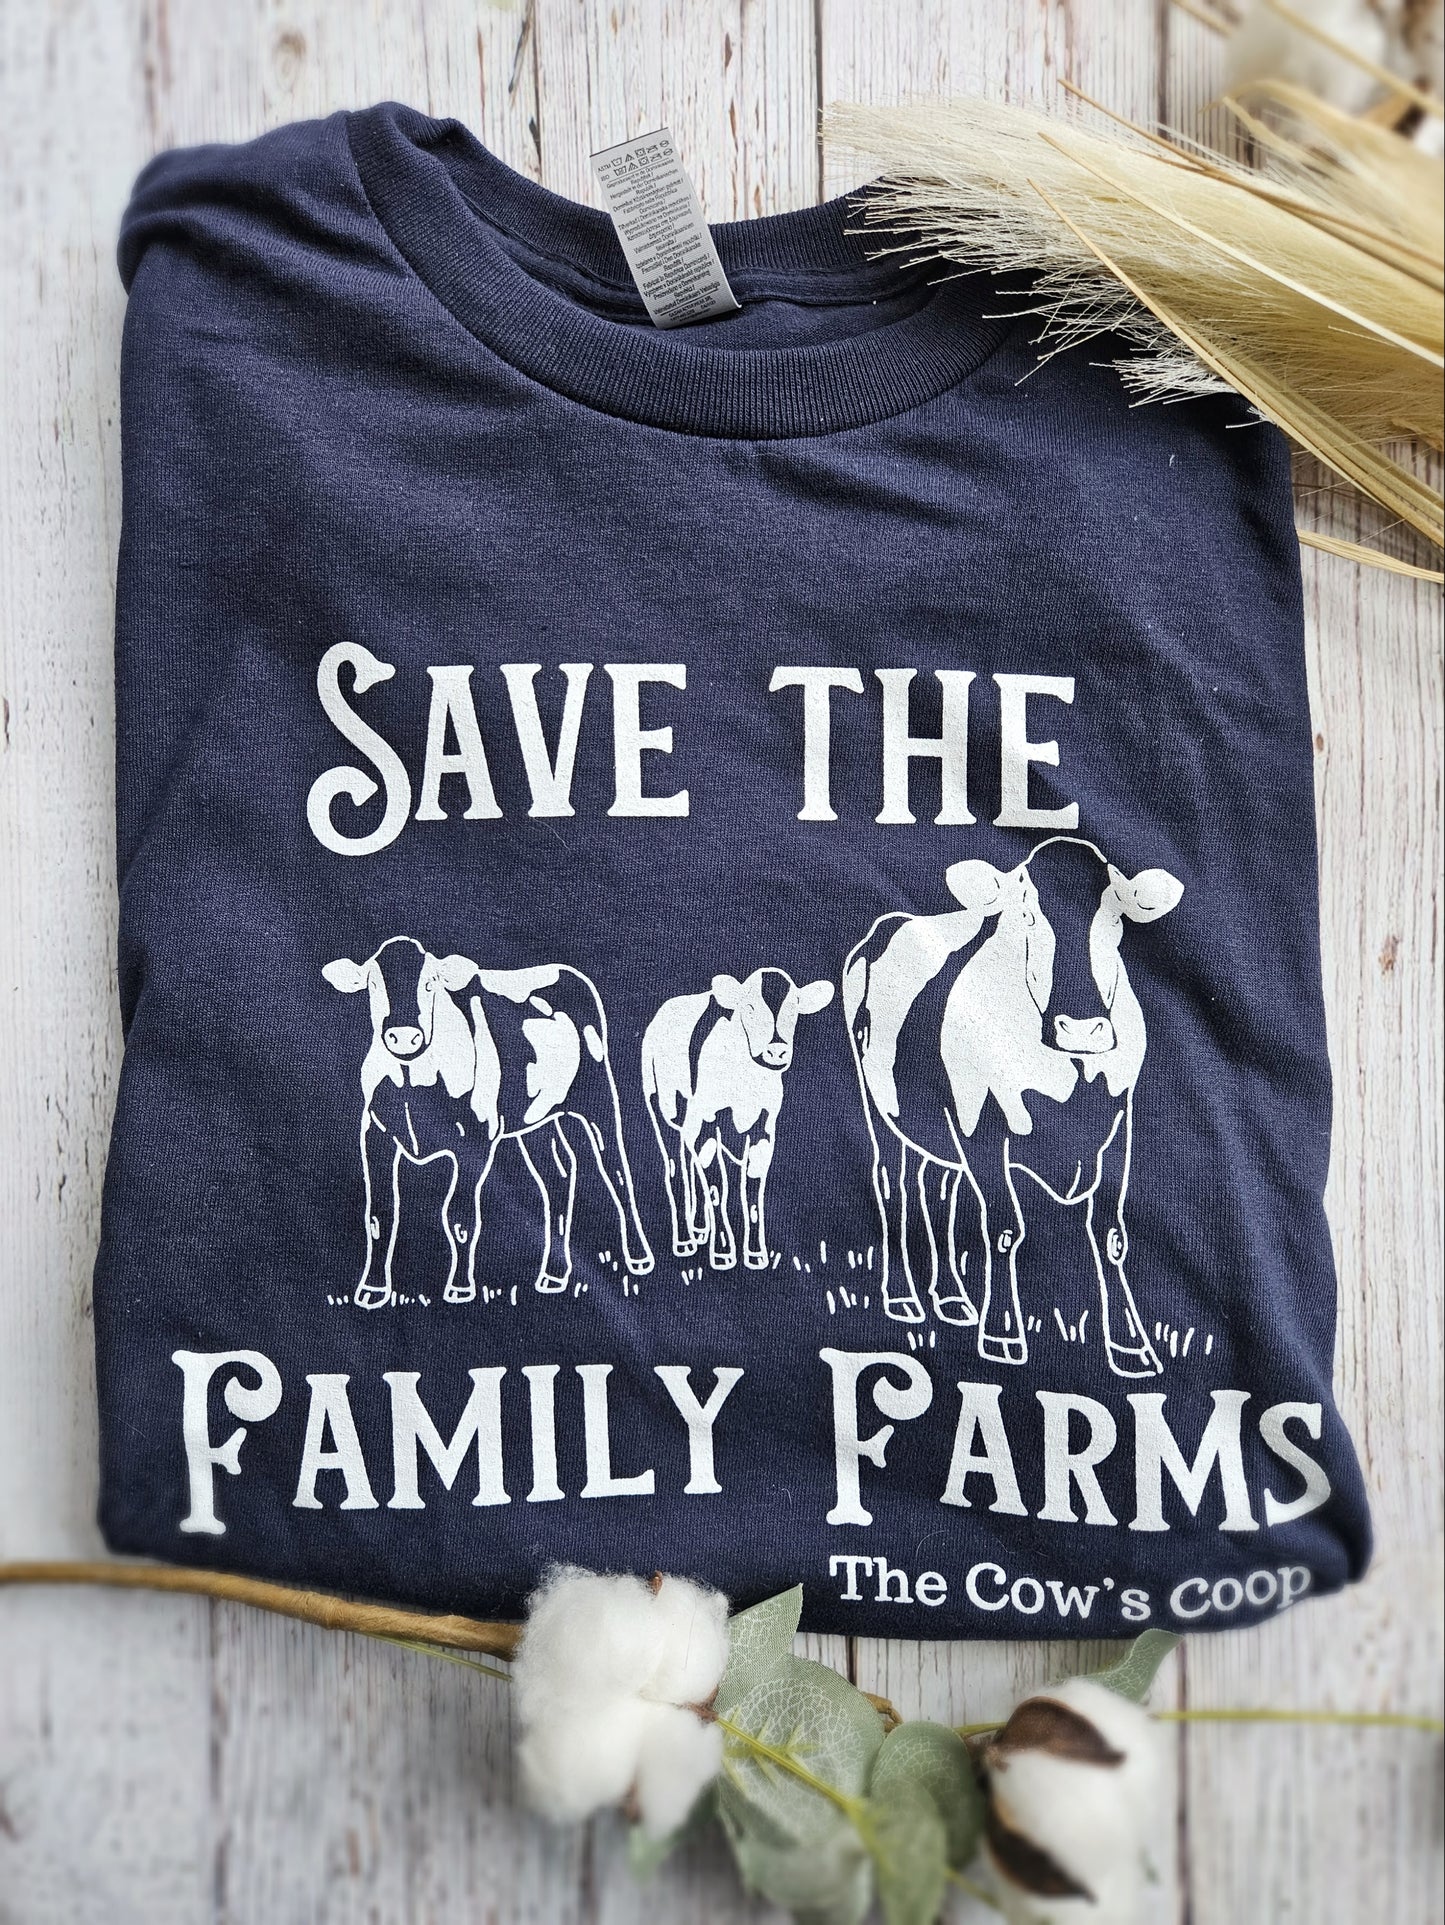 "Save the Family Farms" T-Shirt